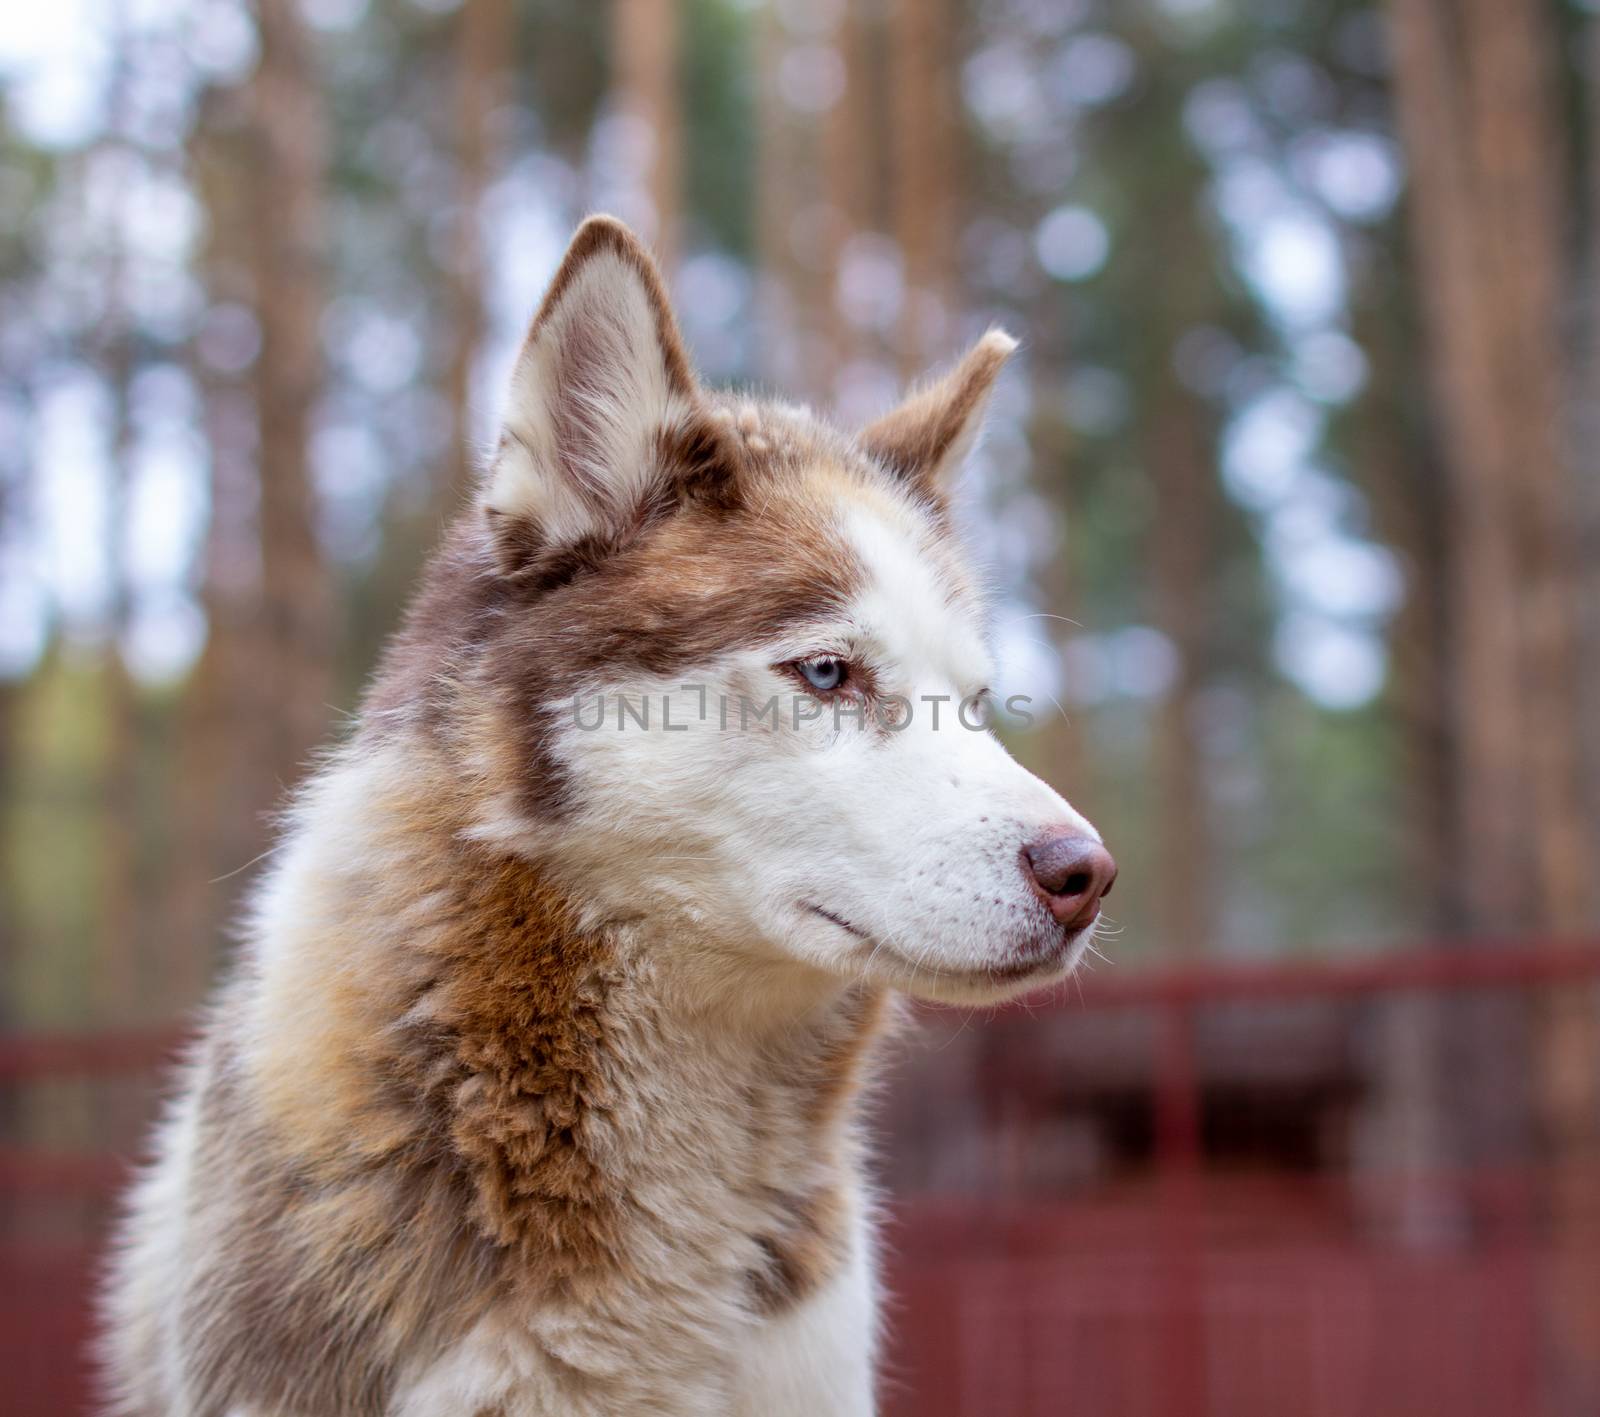 Portrait shot of a Siberian husky dog with blue eyes in nature. A brown and white dog with blue eyes. High quality photo